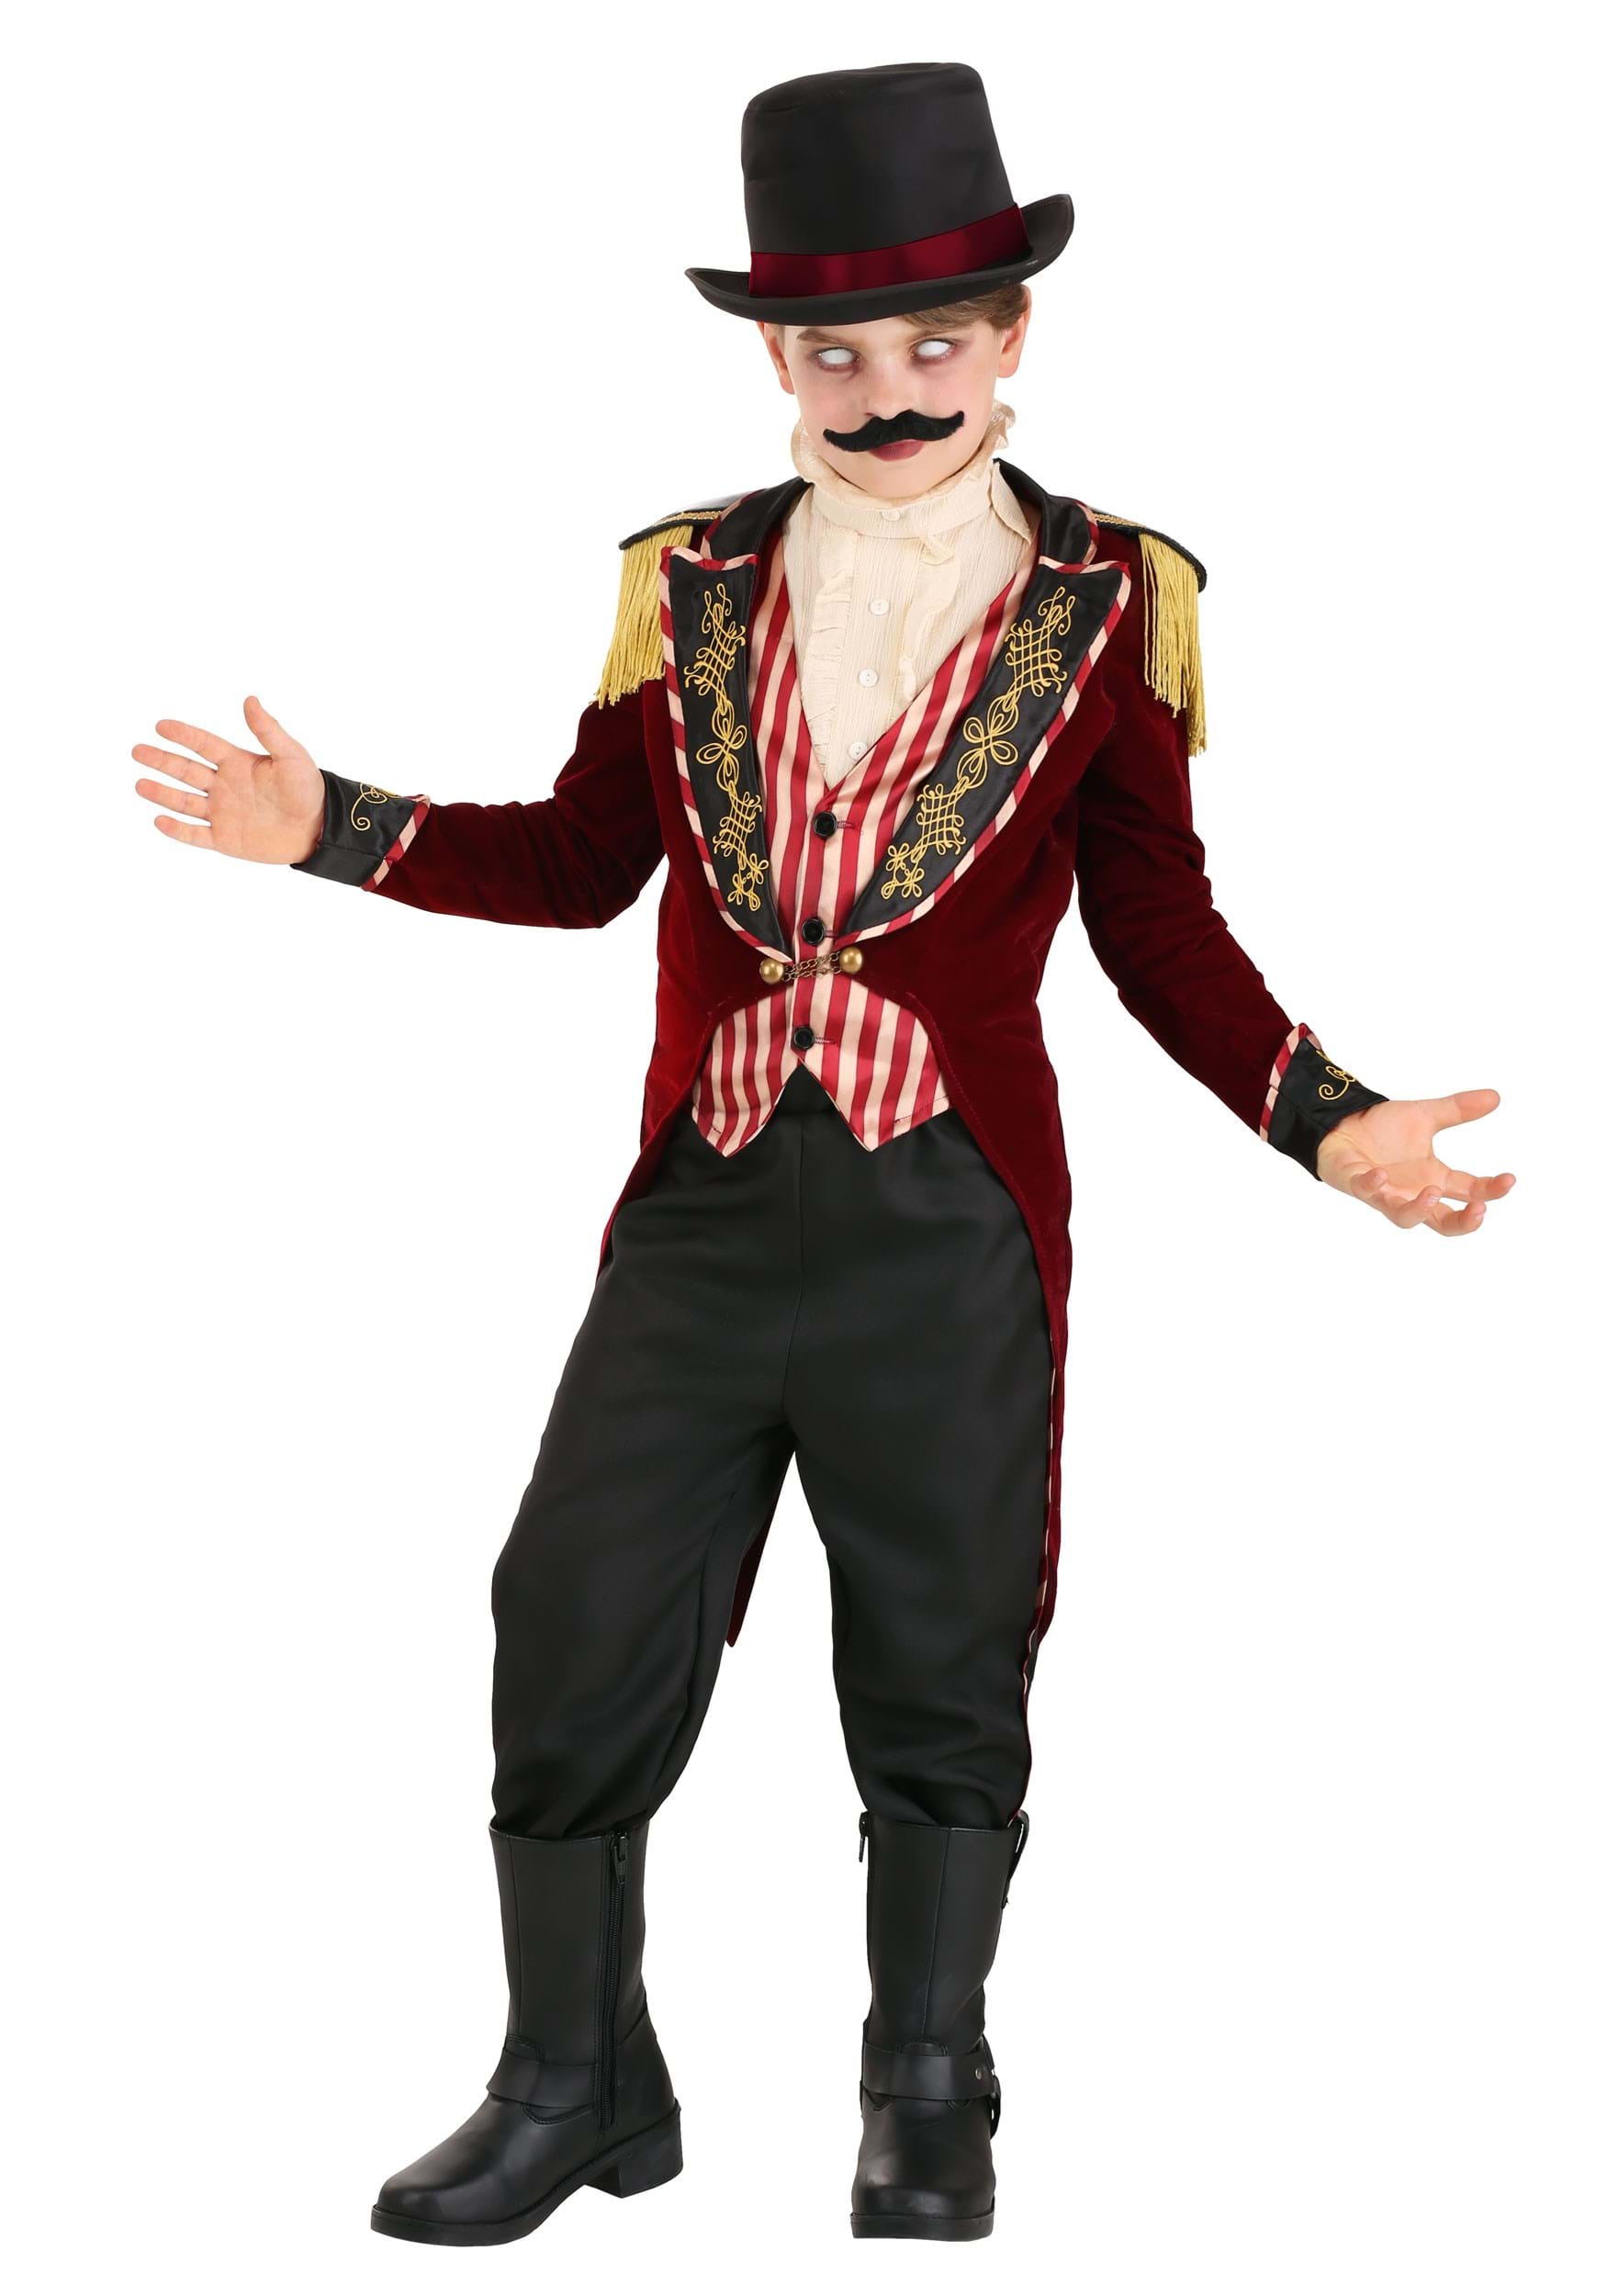 Photos - Fancy Dress FUN Costumes Possessed Ringmaster Costume for Boy's Black/Red/Brow